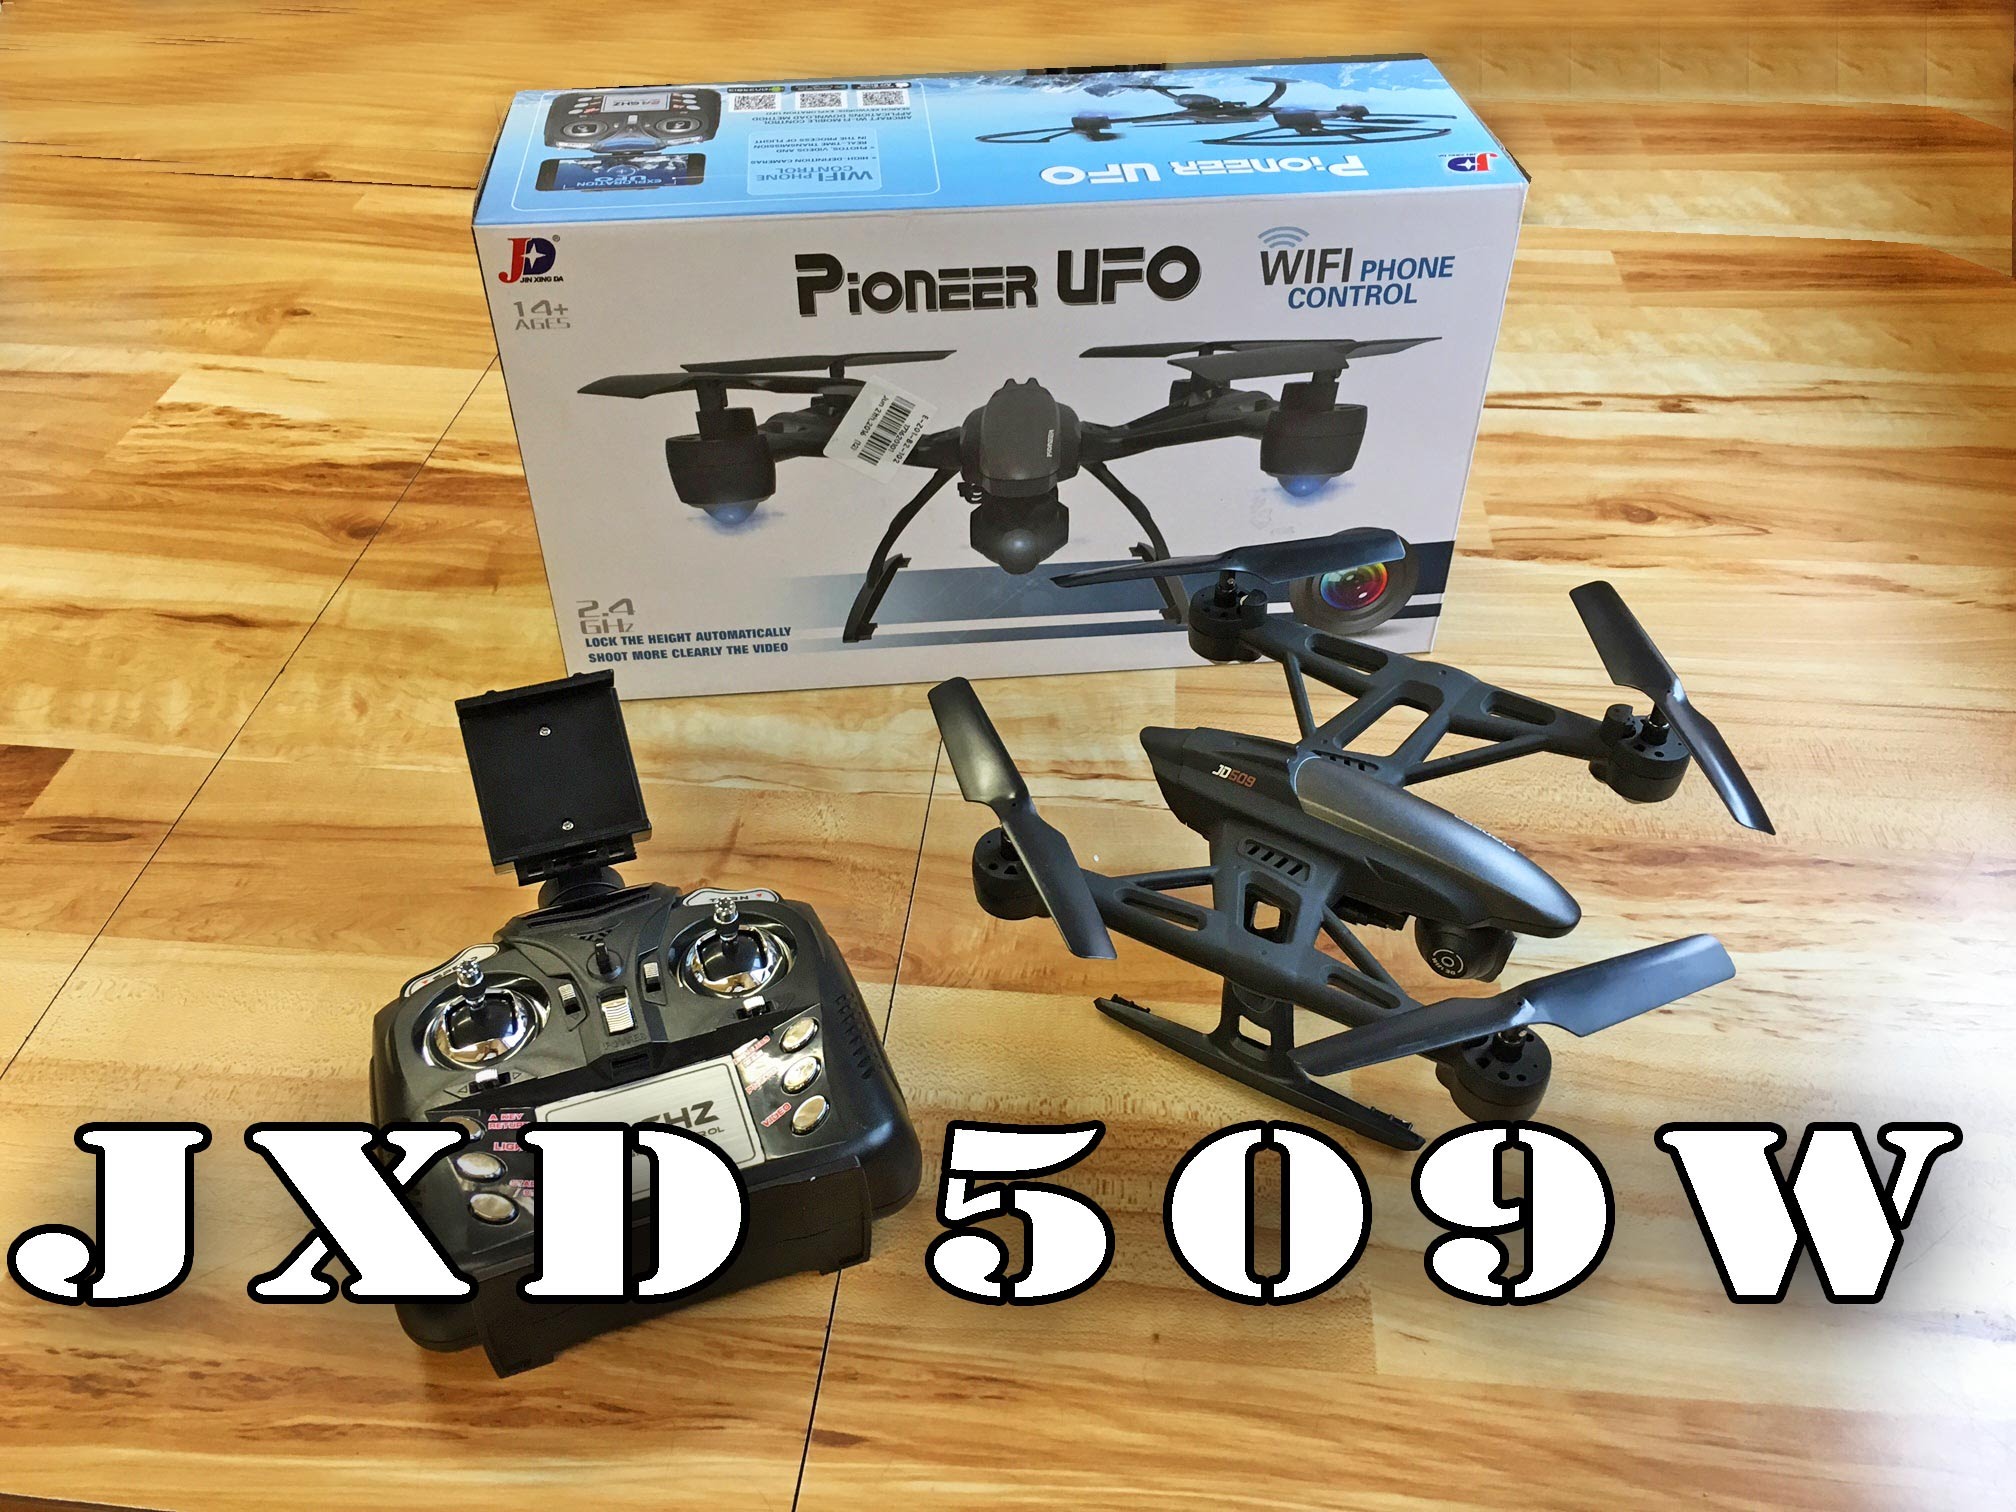 JXD509W WiFi Quadcopter Drone with Altitude hold PT1